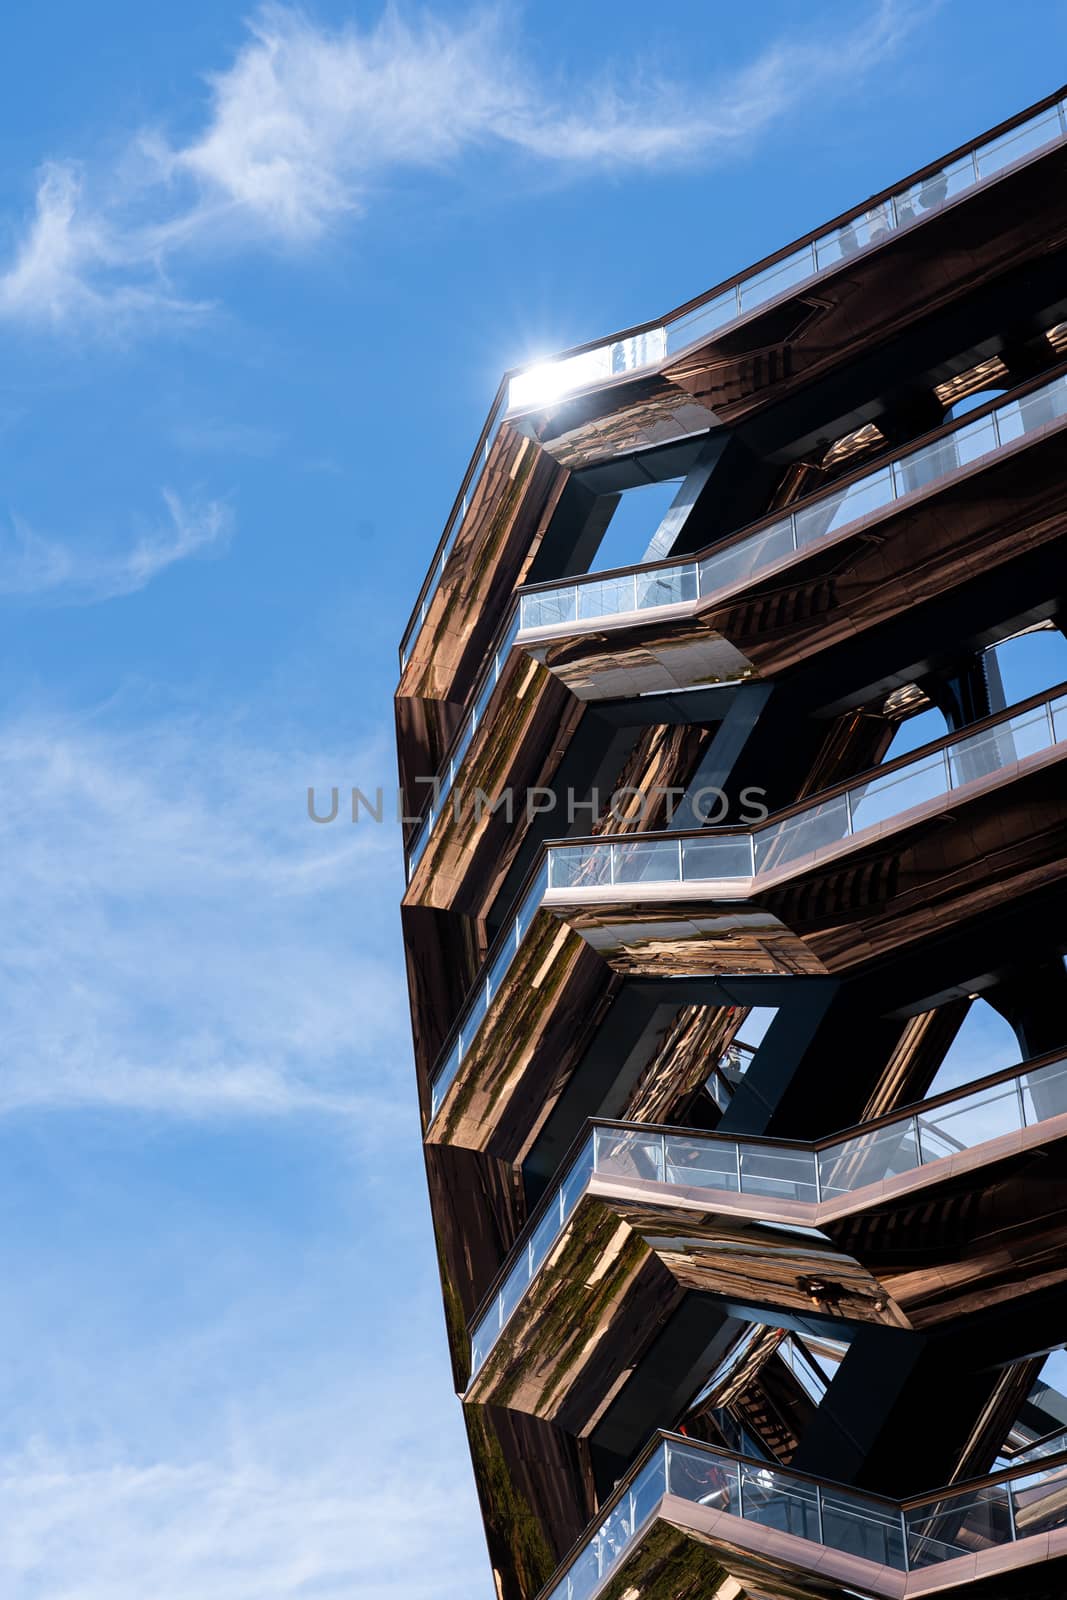 New York, United States - September 21, 2019: The Vessel, a spiral staircase landmark at Hudson Yards in Manhattan. Designed by architect Thomas Heatherwick in 2019.